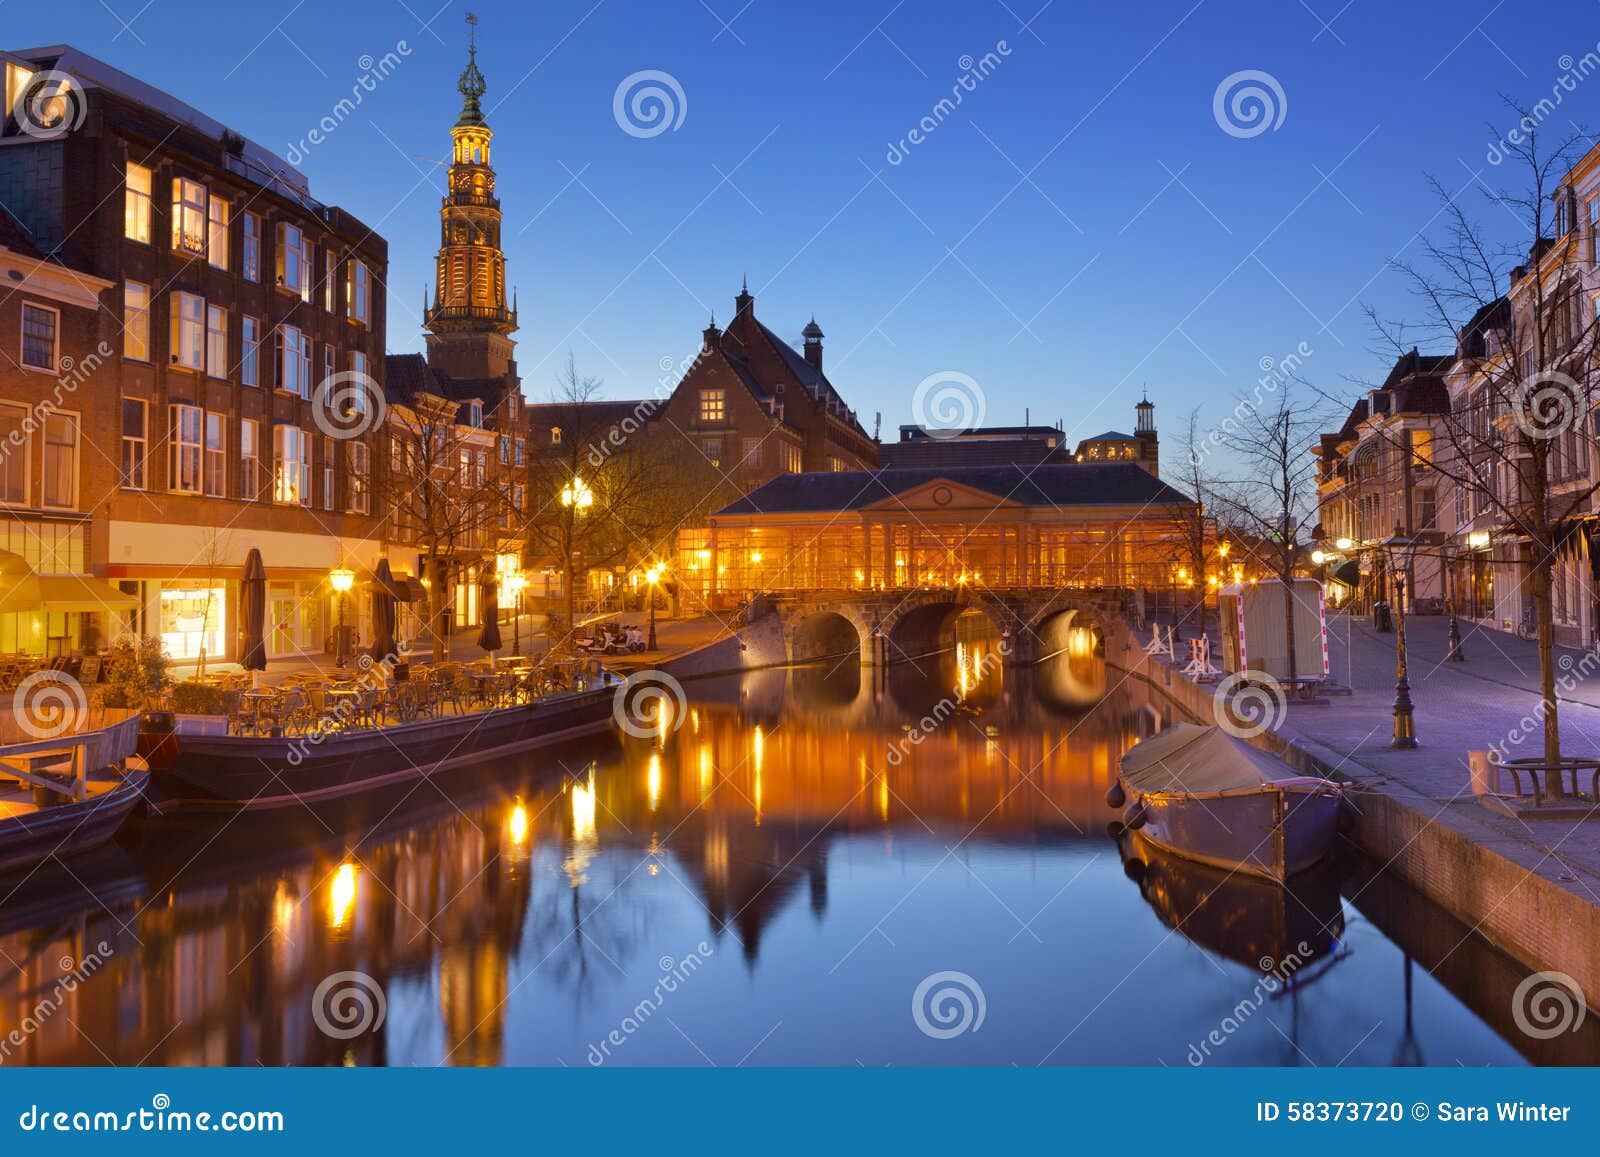 city of leiden, the netherlands at night